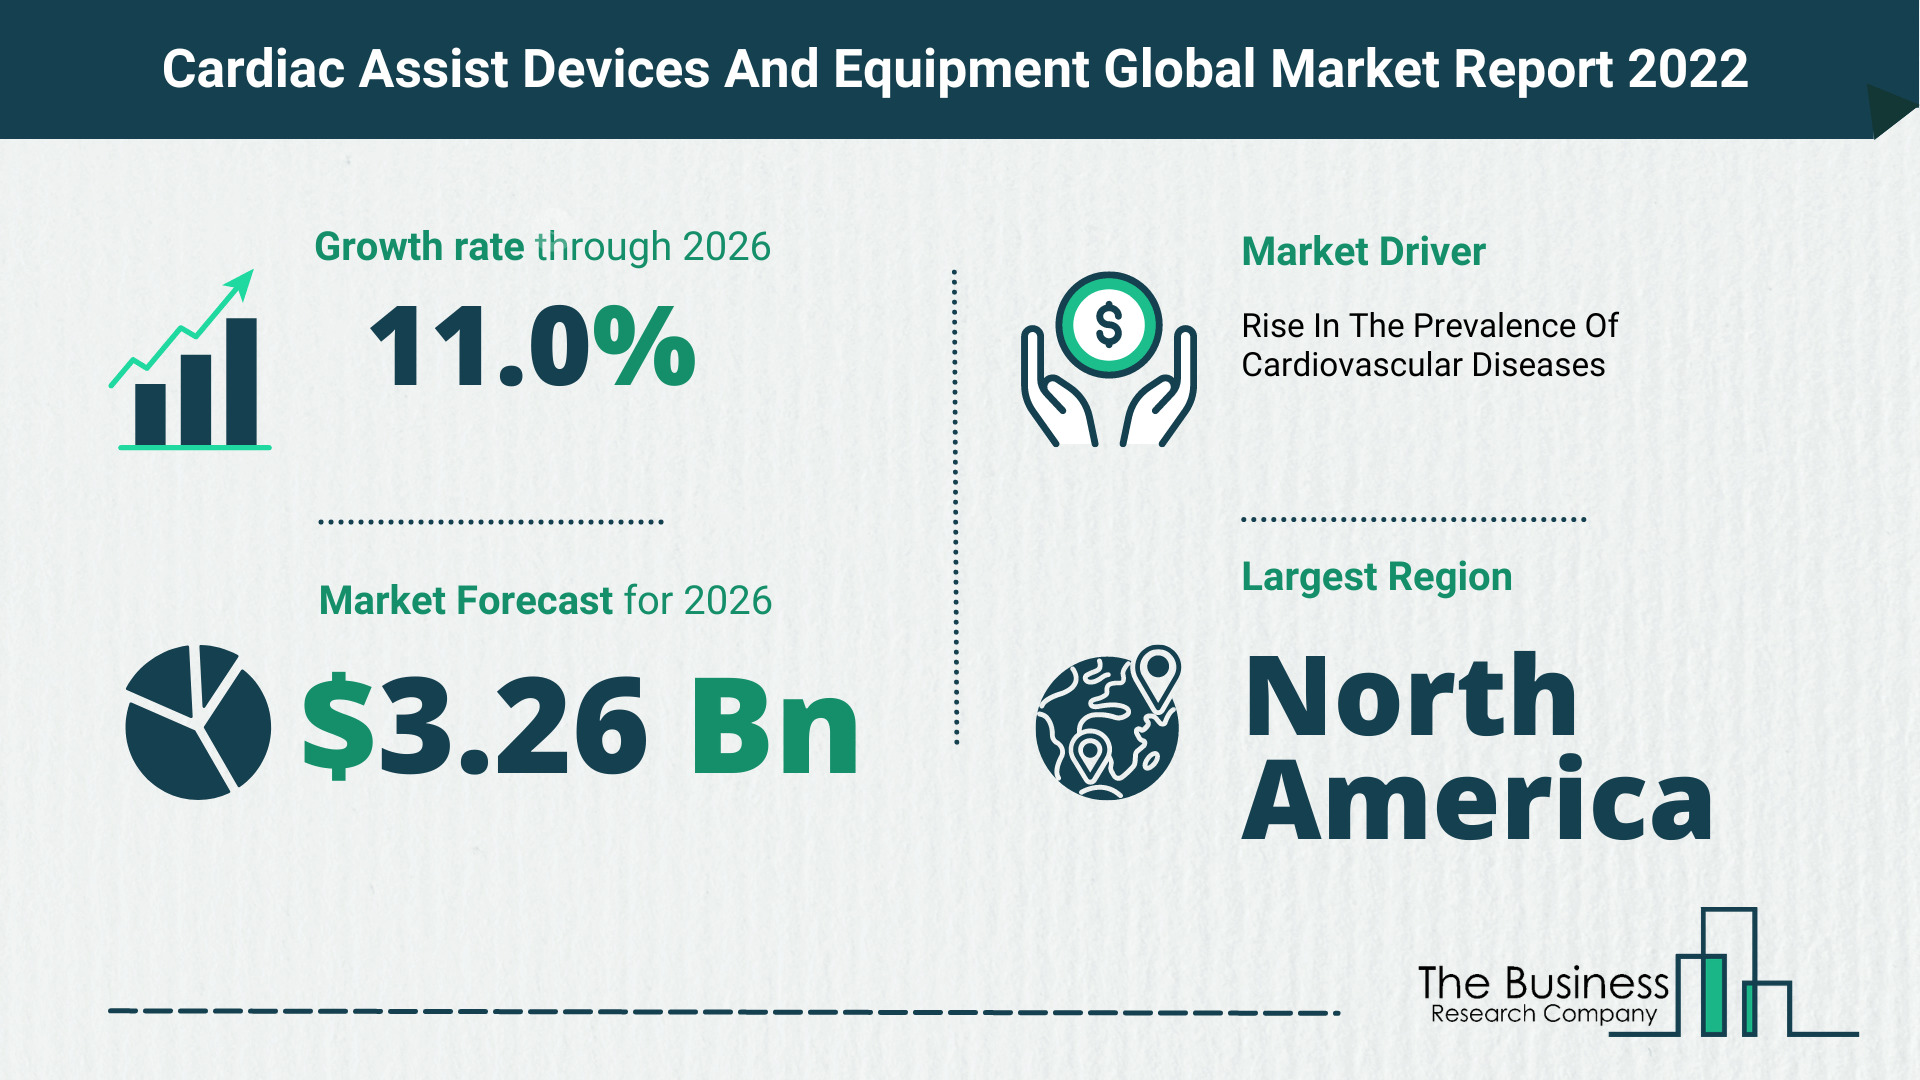 The Cardiac Assist Devices And Equipment Market Share, Market Size, And Growth Rate 2022